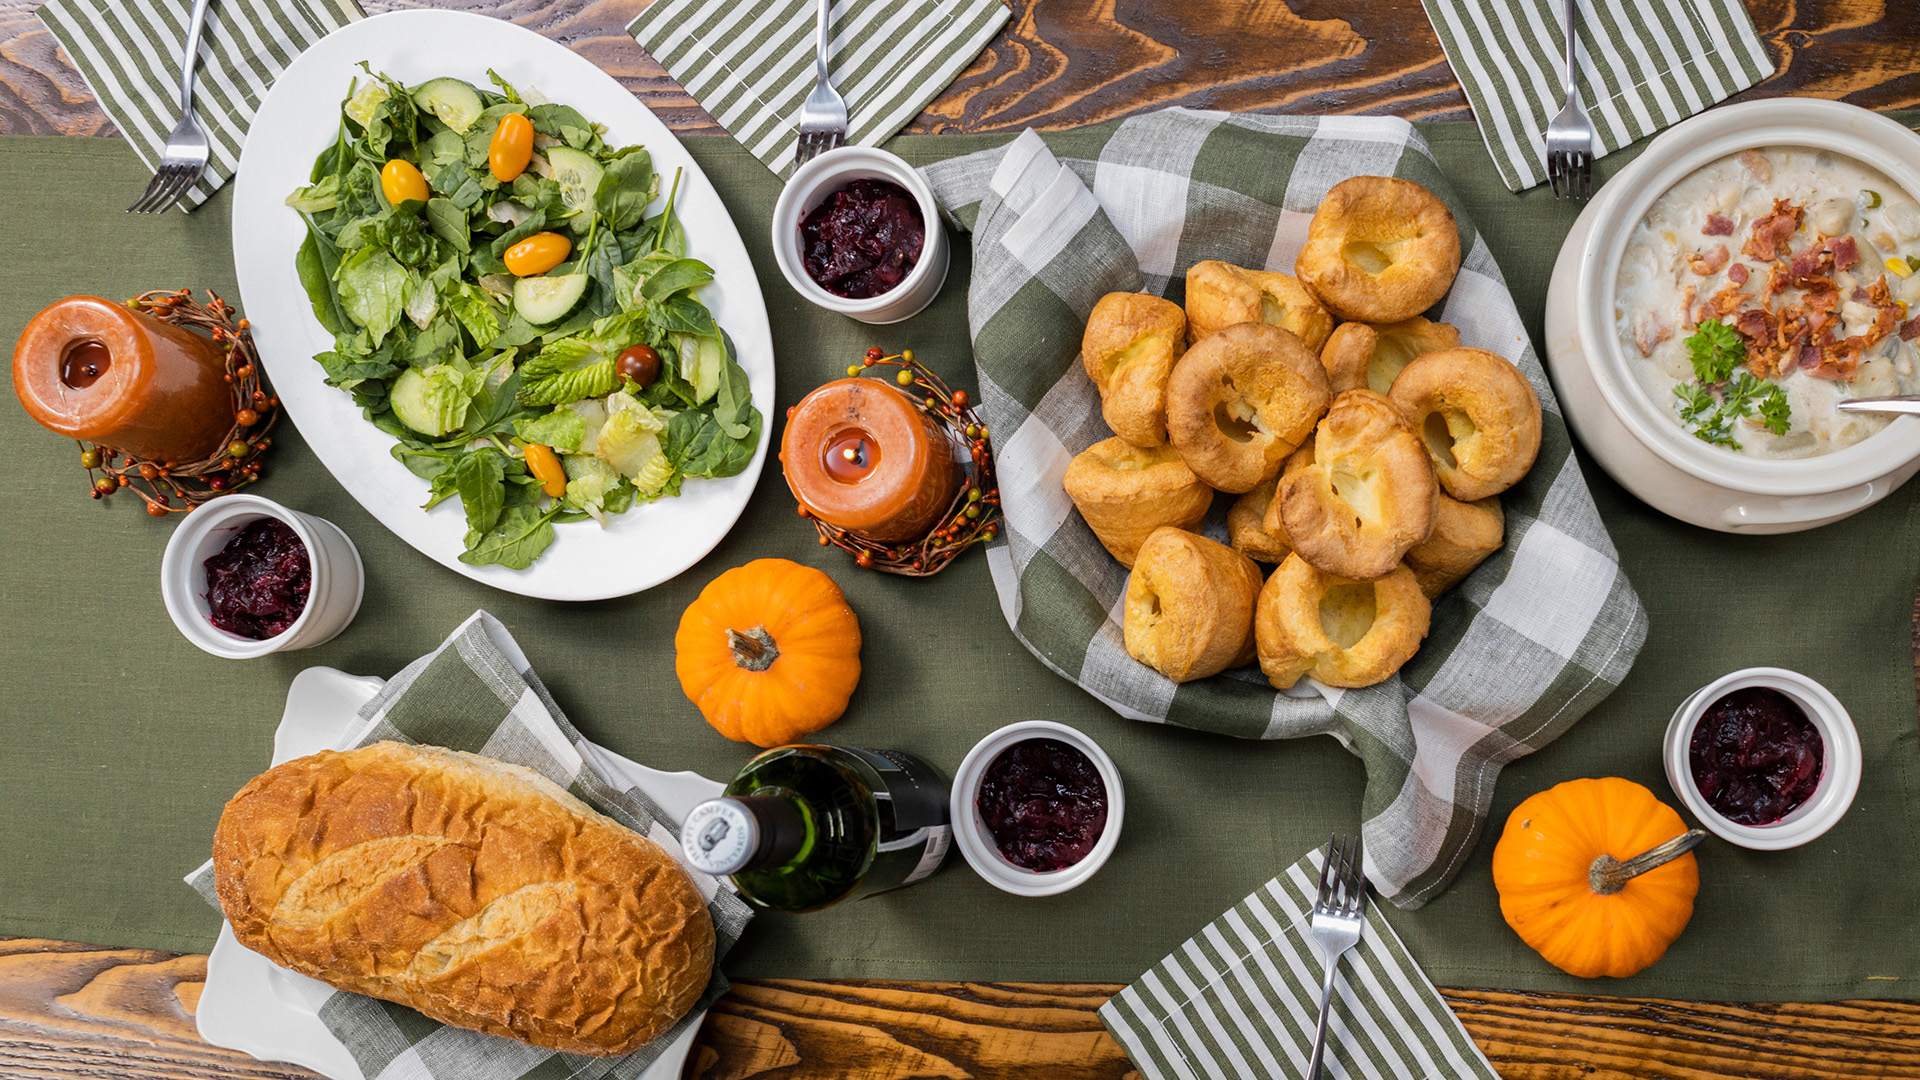 A table is set with platters of salad, croissants and bread.